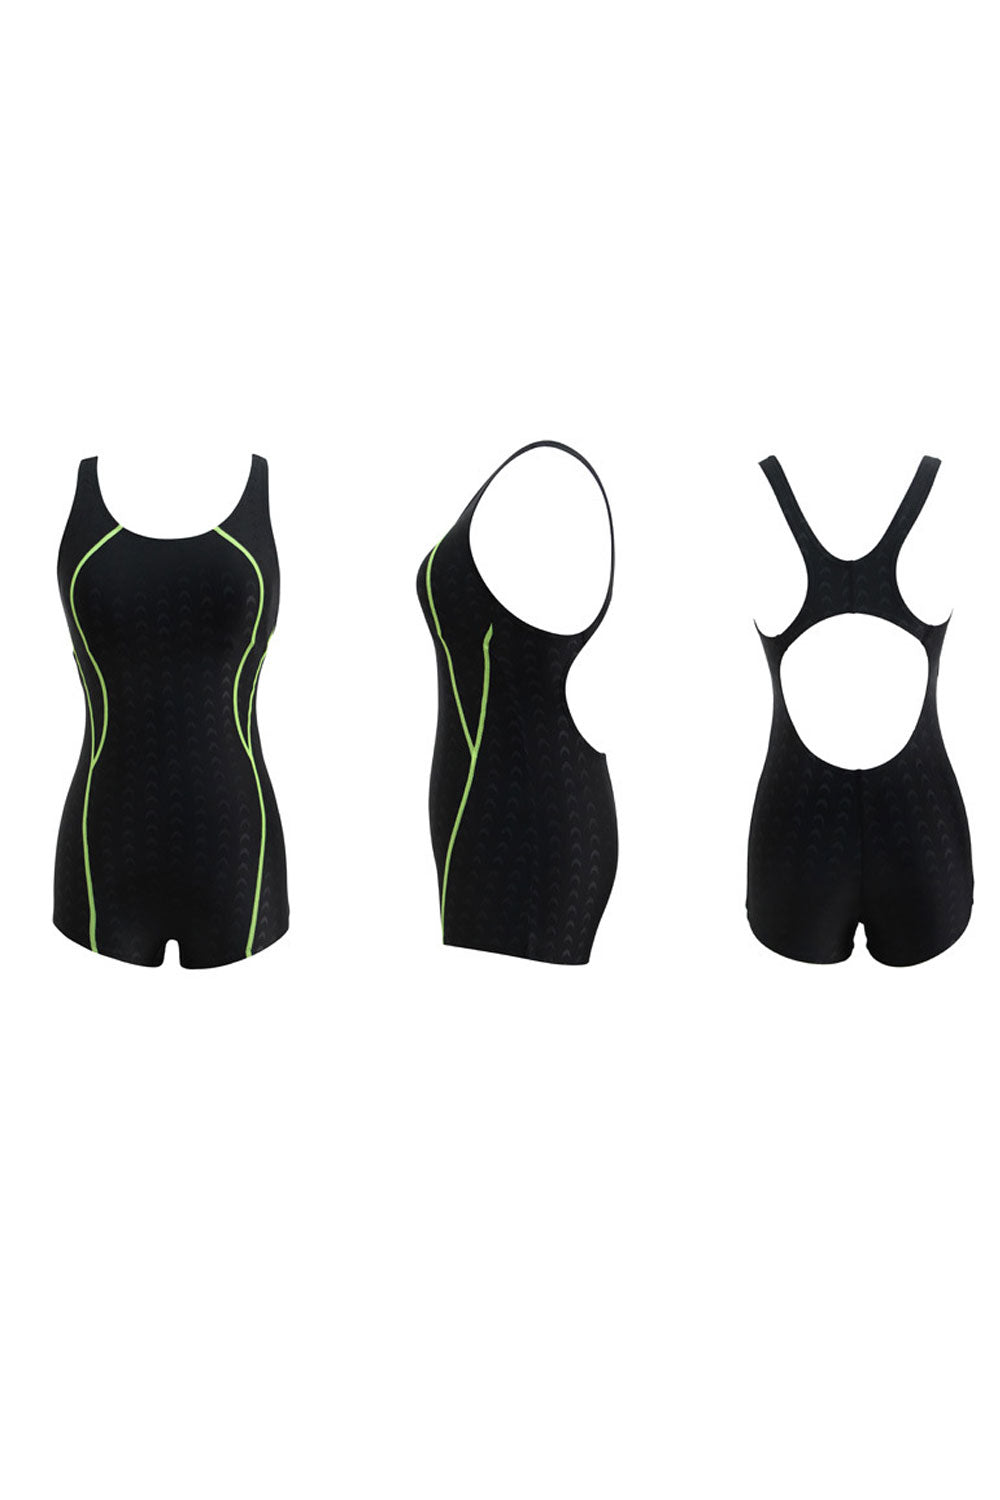 New water-repellent and quick-drying imitation sharkskin women's boxer sports professional women's one-piece swimsuit with removable chest pads